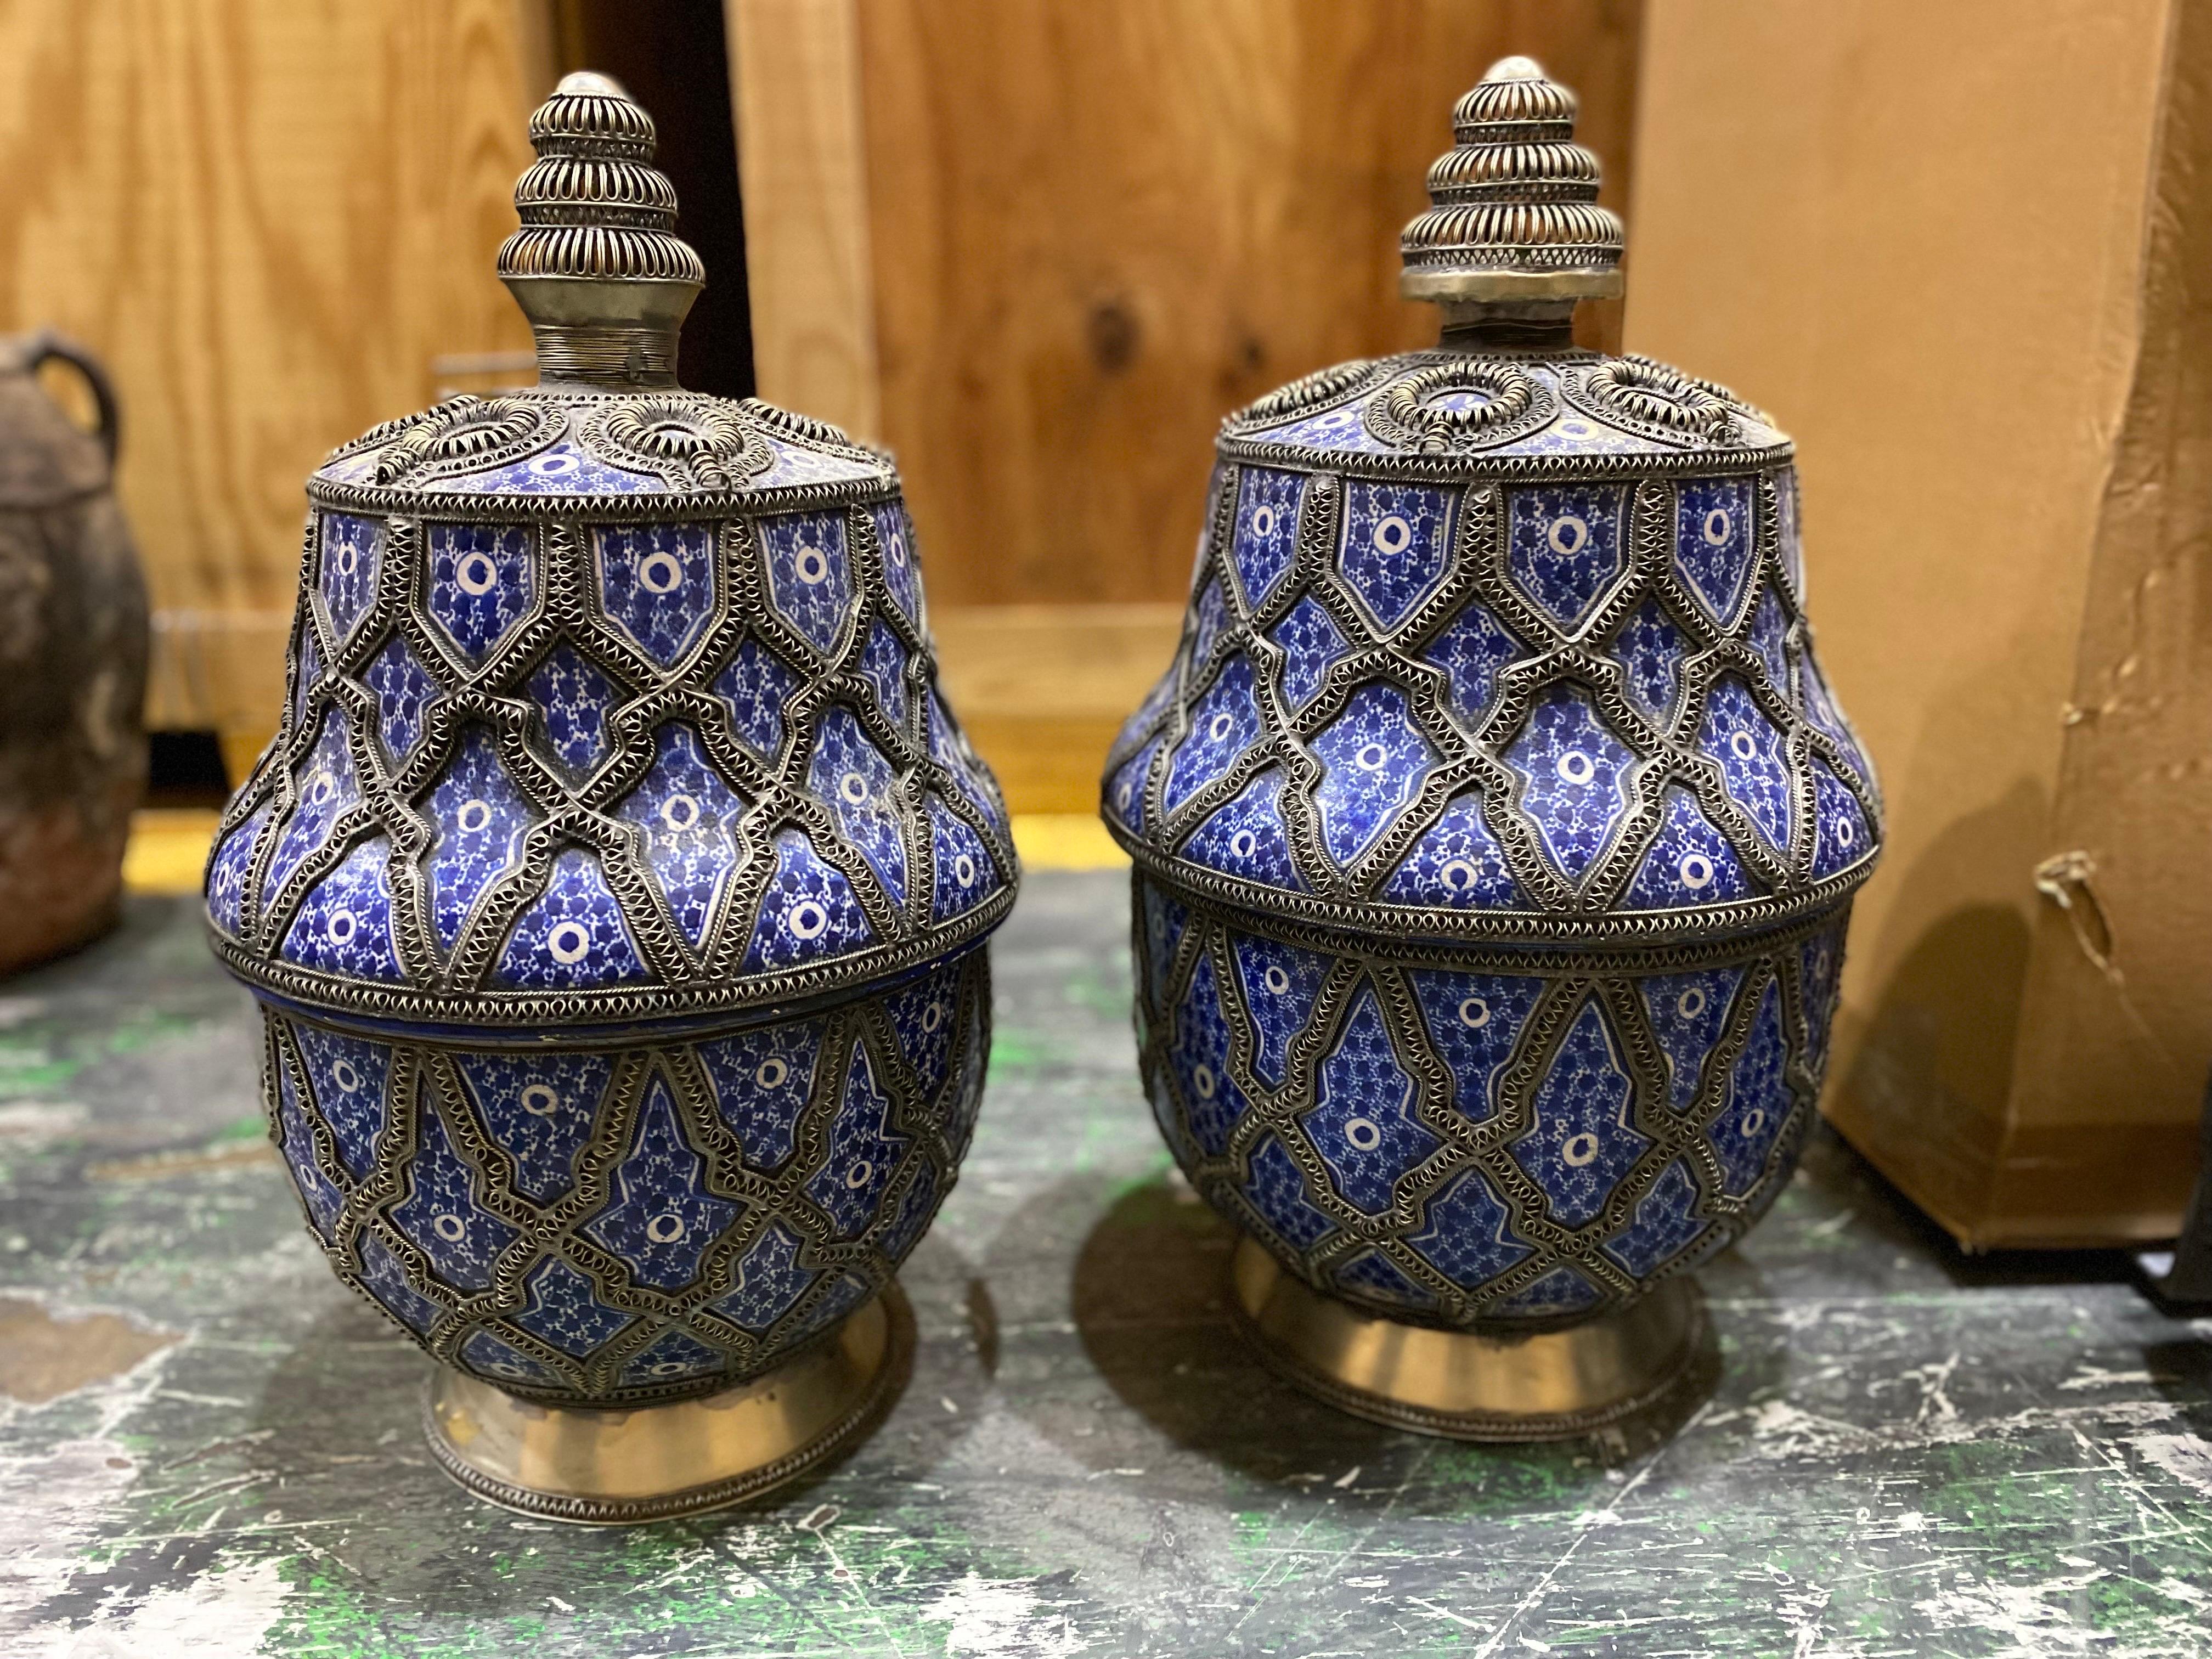 Matched Set of Blue Moroccan Vases with Tops, Late 20th Century
Cobalt on white ground ceramic vases with tops. A unique spiral wire diamond pattern decoration throughout with metal surround base. One very slightly larger than the other. Good